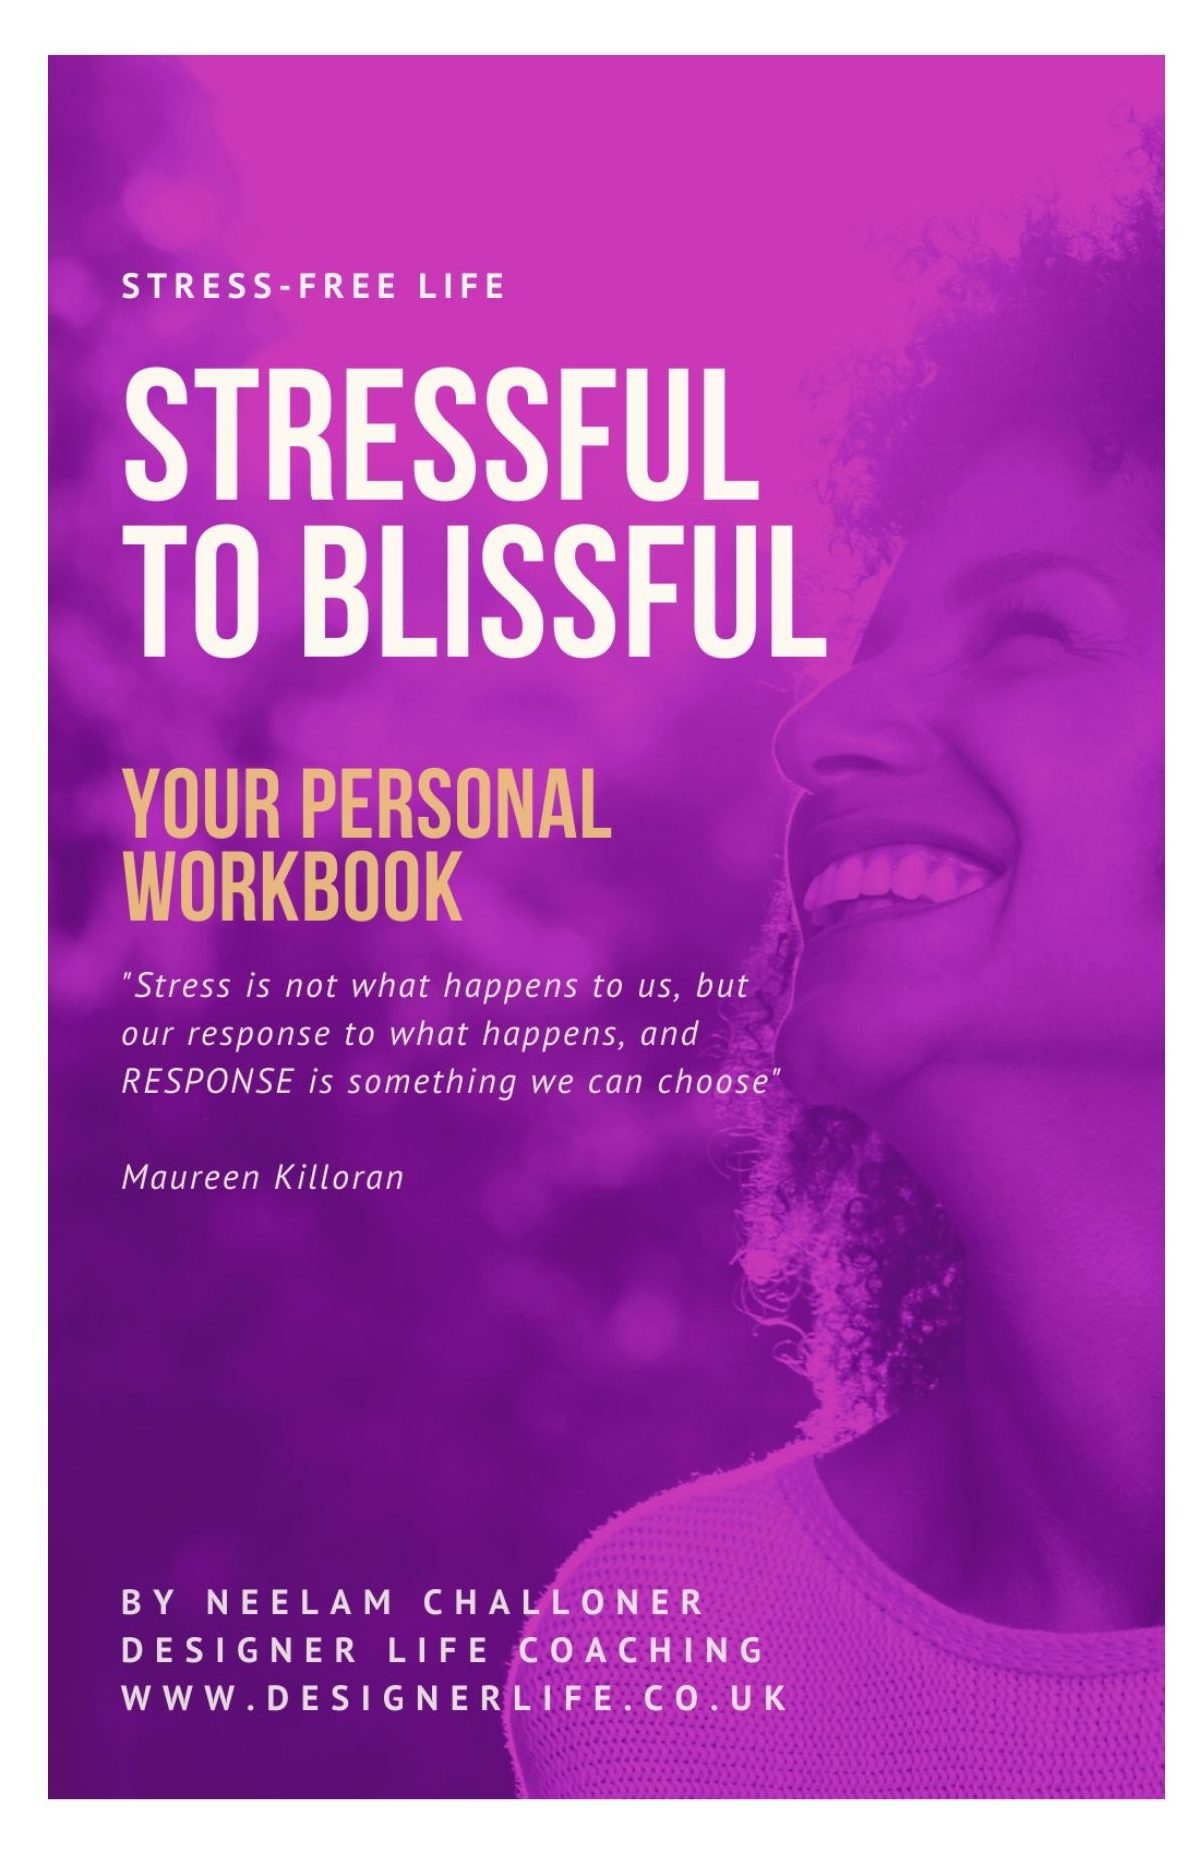 Stressful to Blissful Toolkit